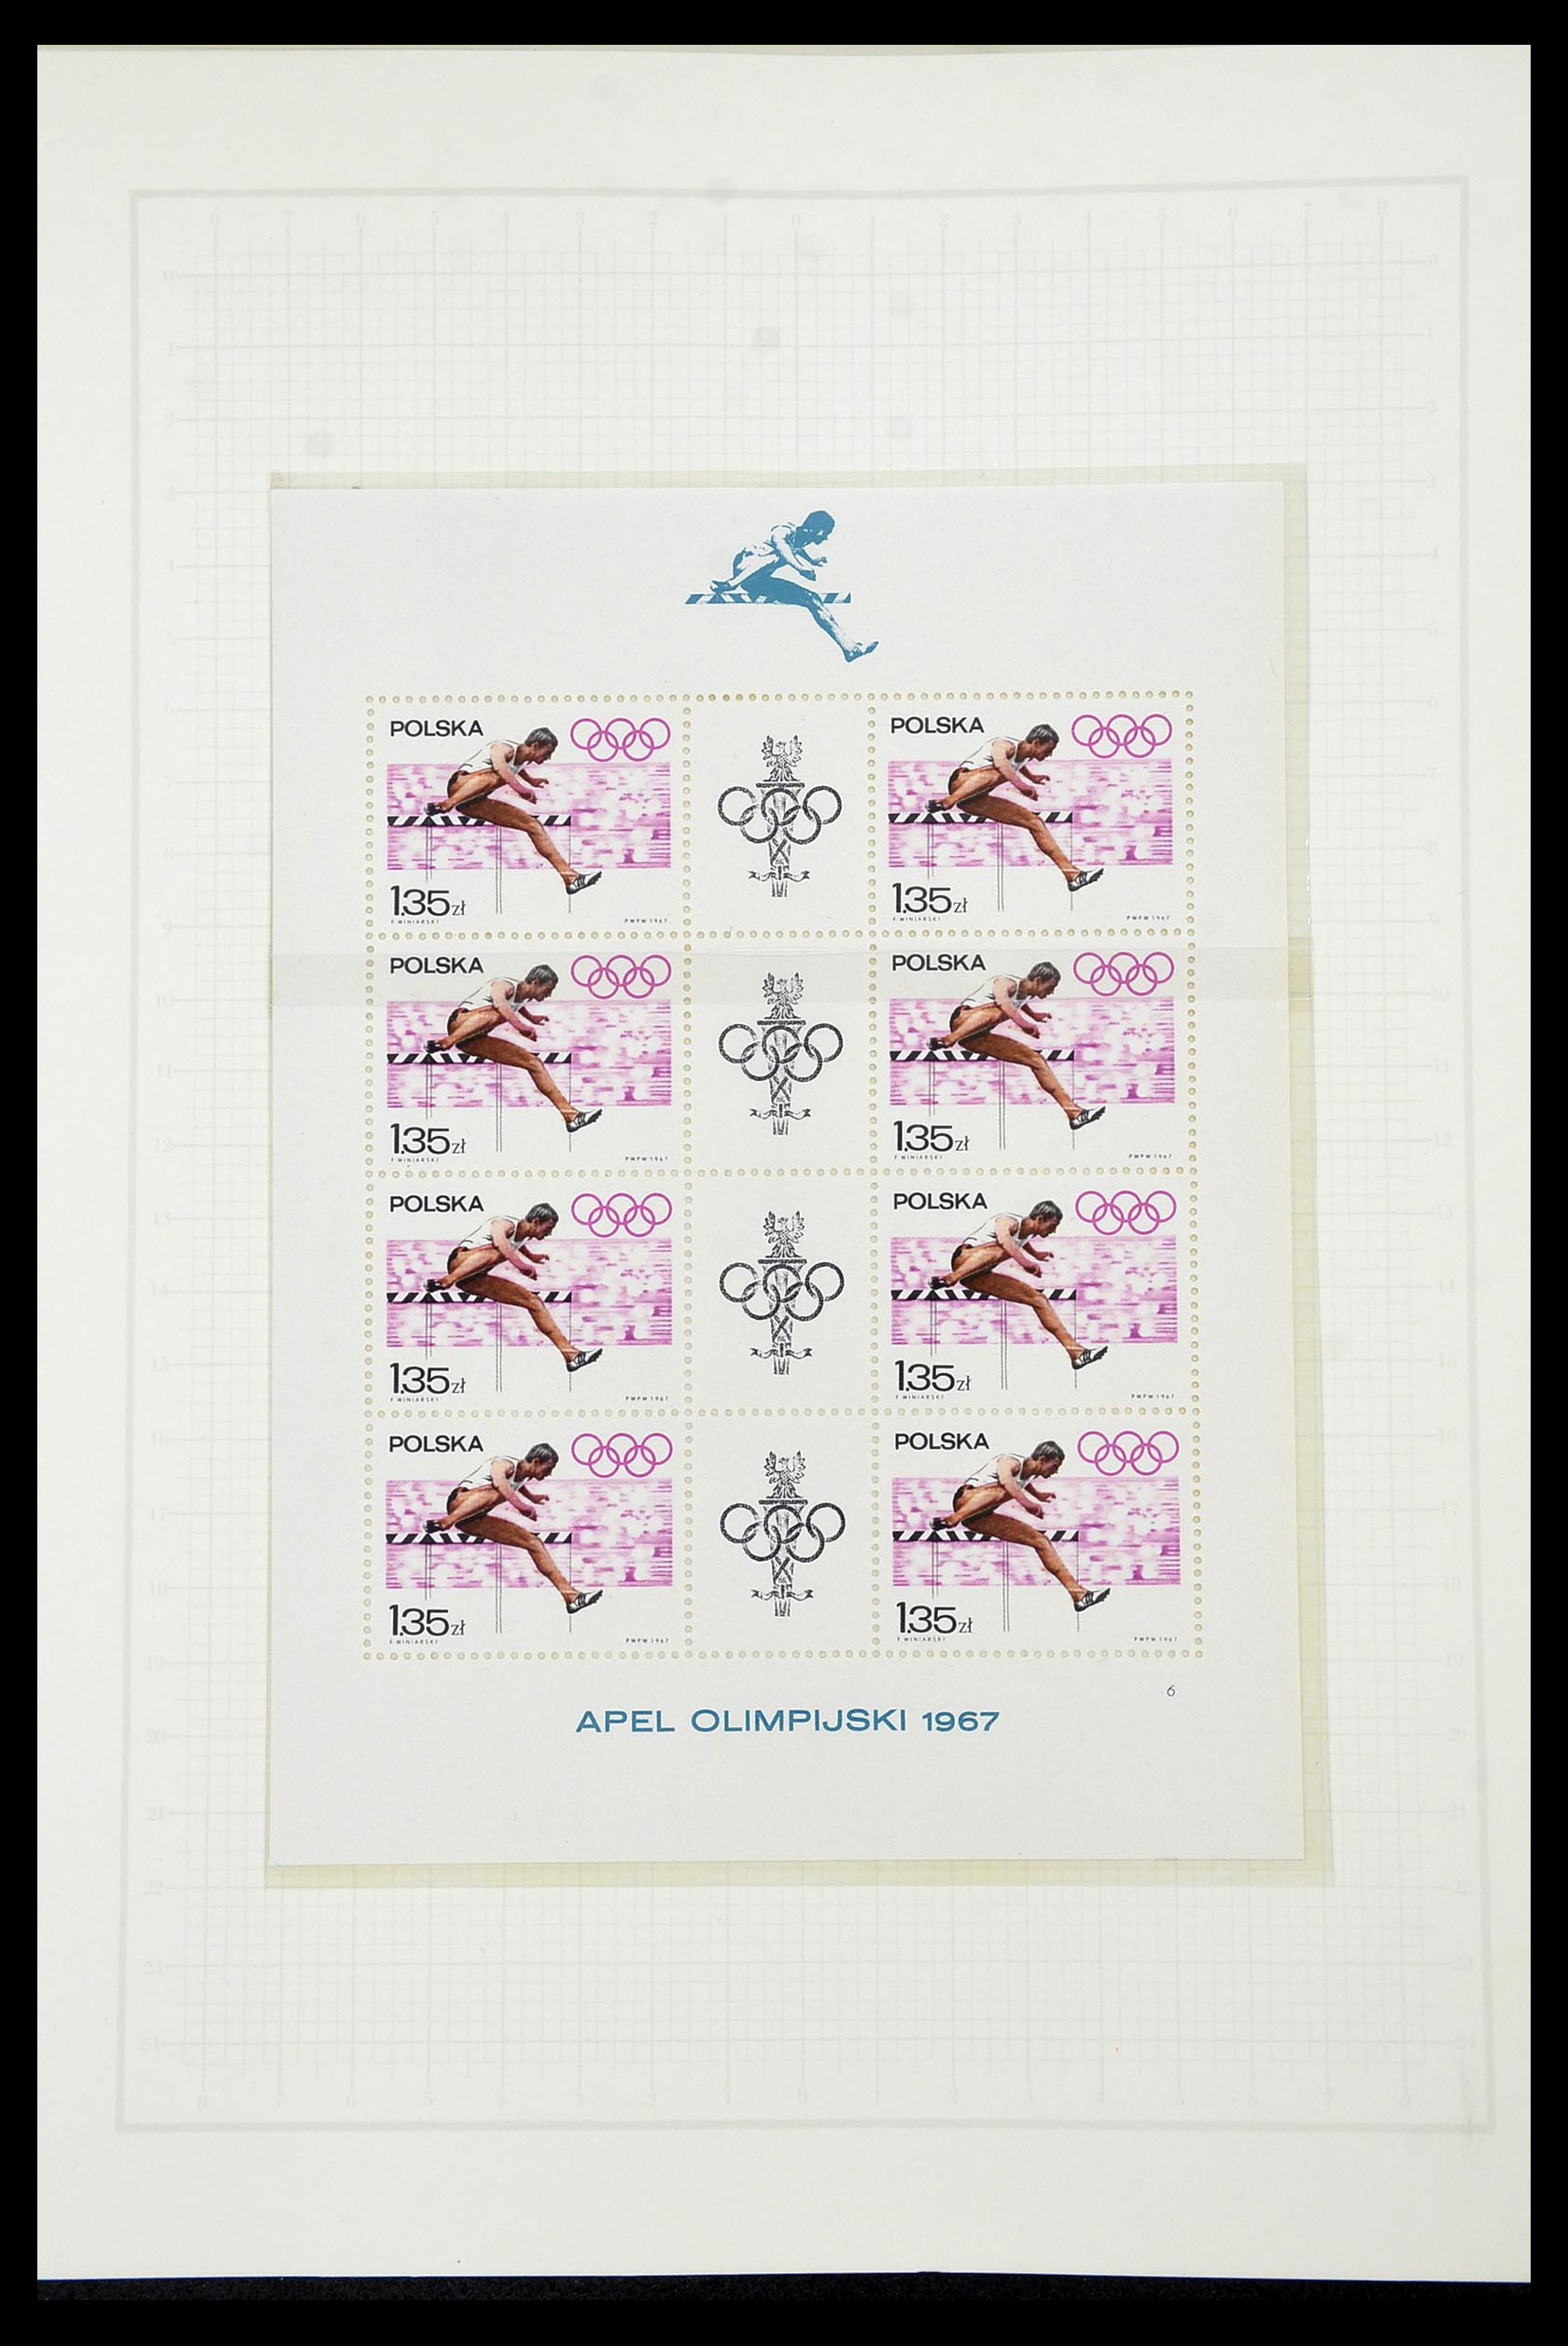 34431 074 - Stamp Collection 34431 Olympics 1964-1968.